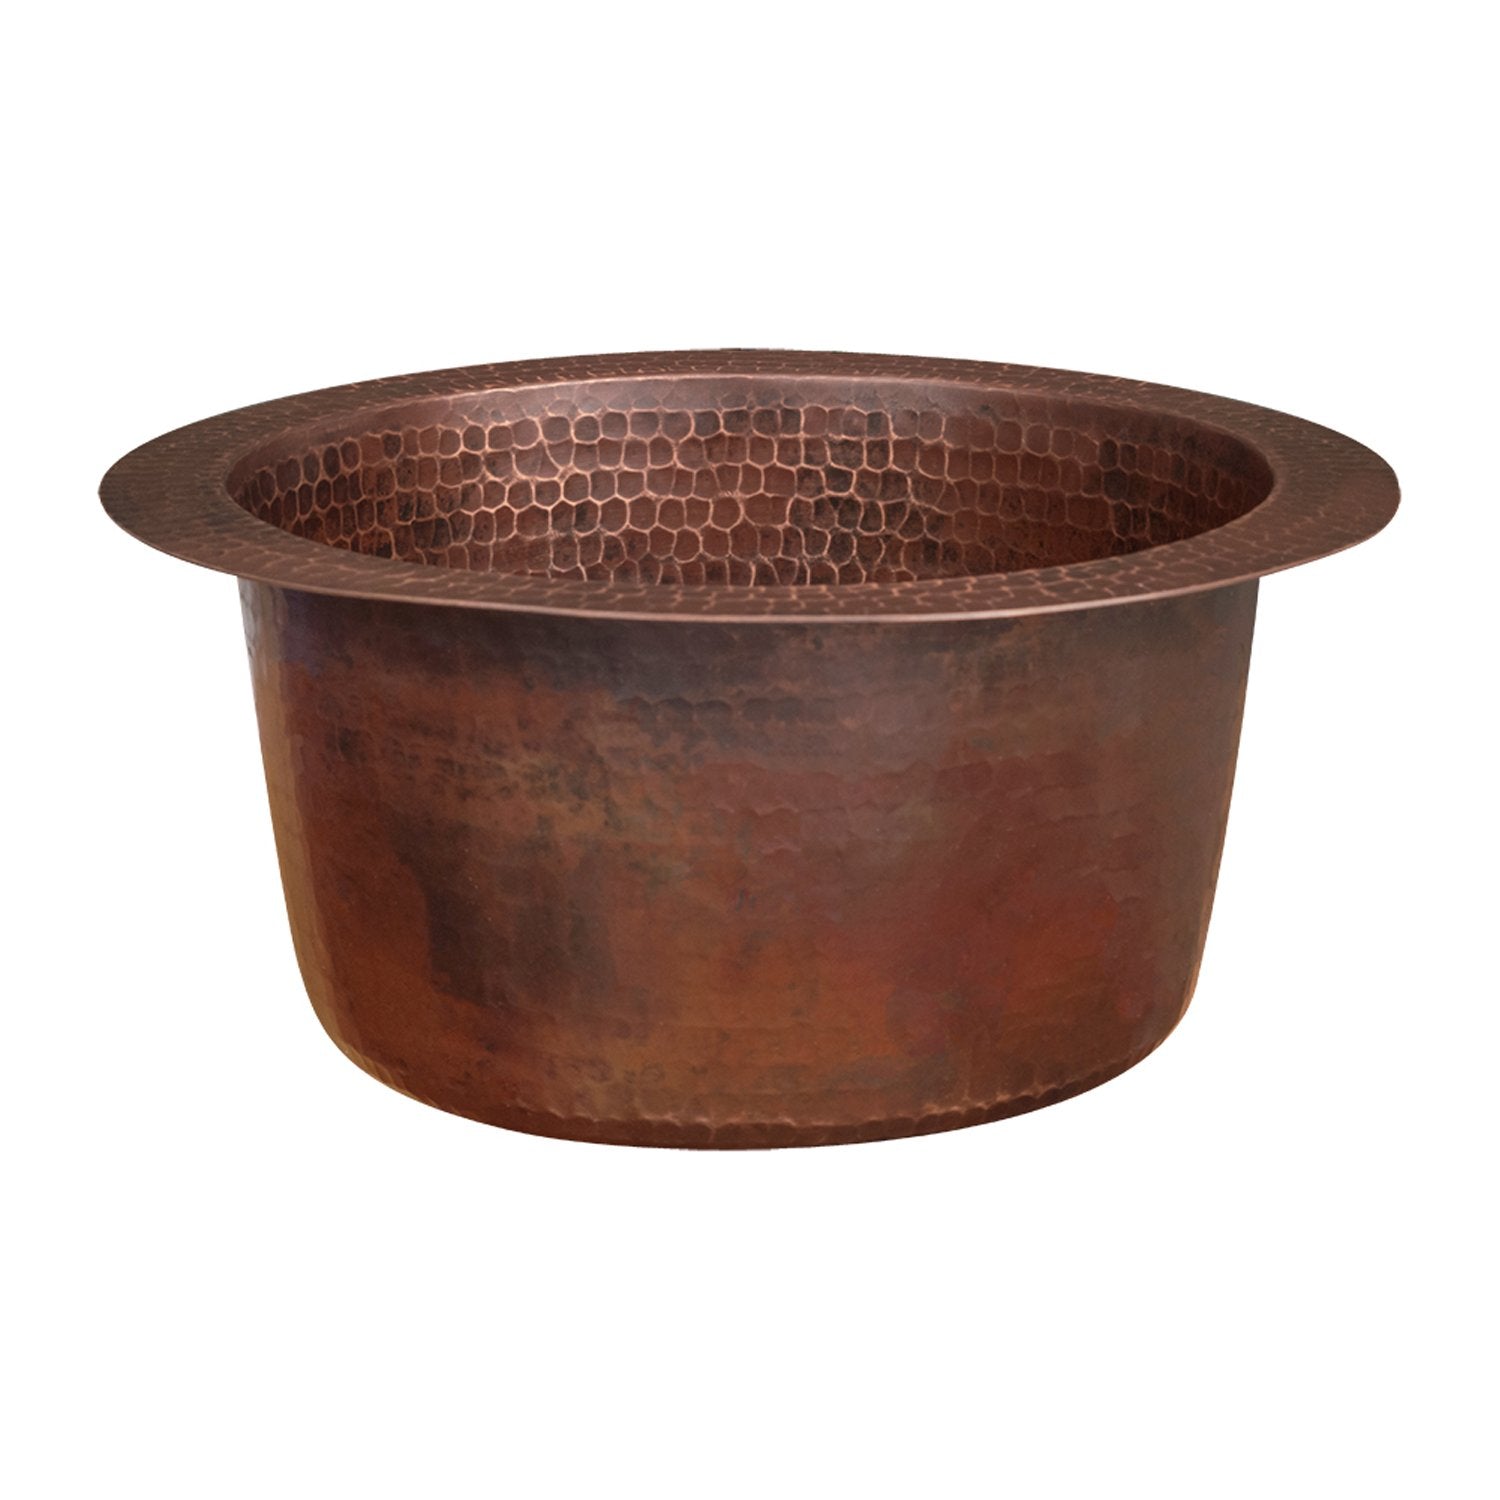 10" Round Hammered Copper Bar Sink with 2" Drain Opening